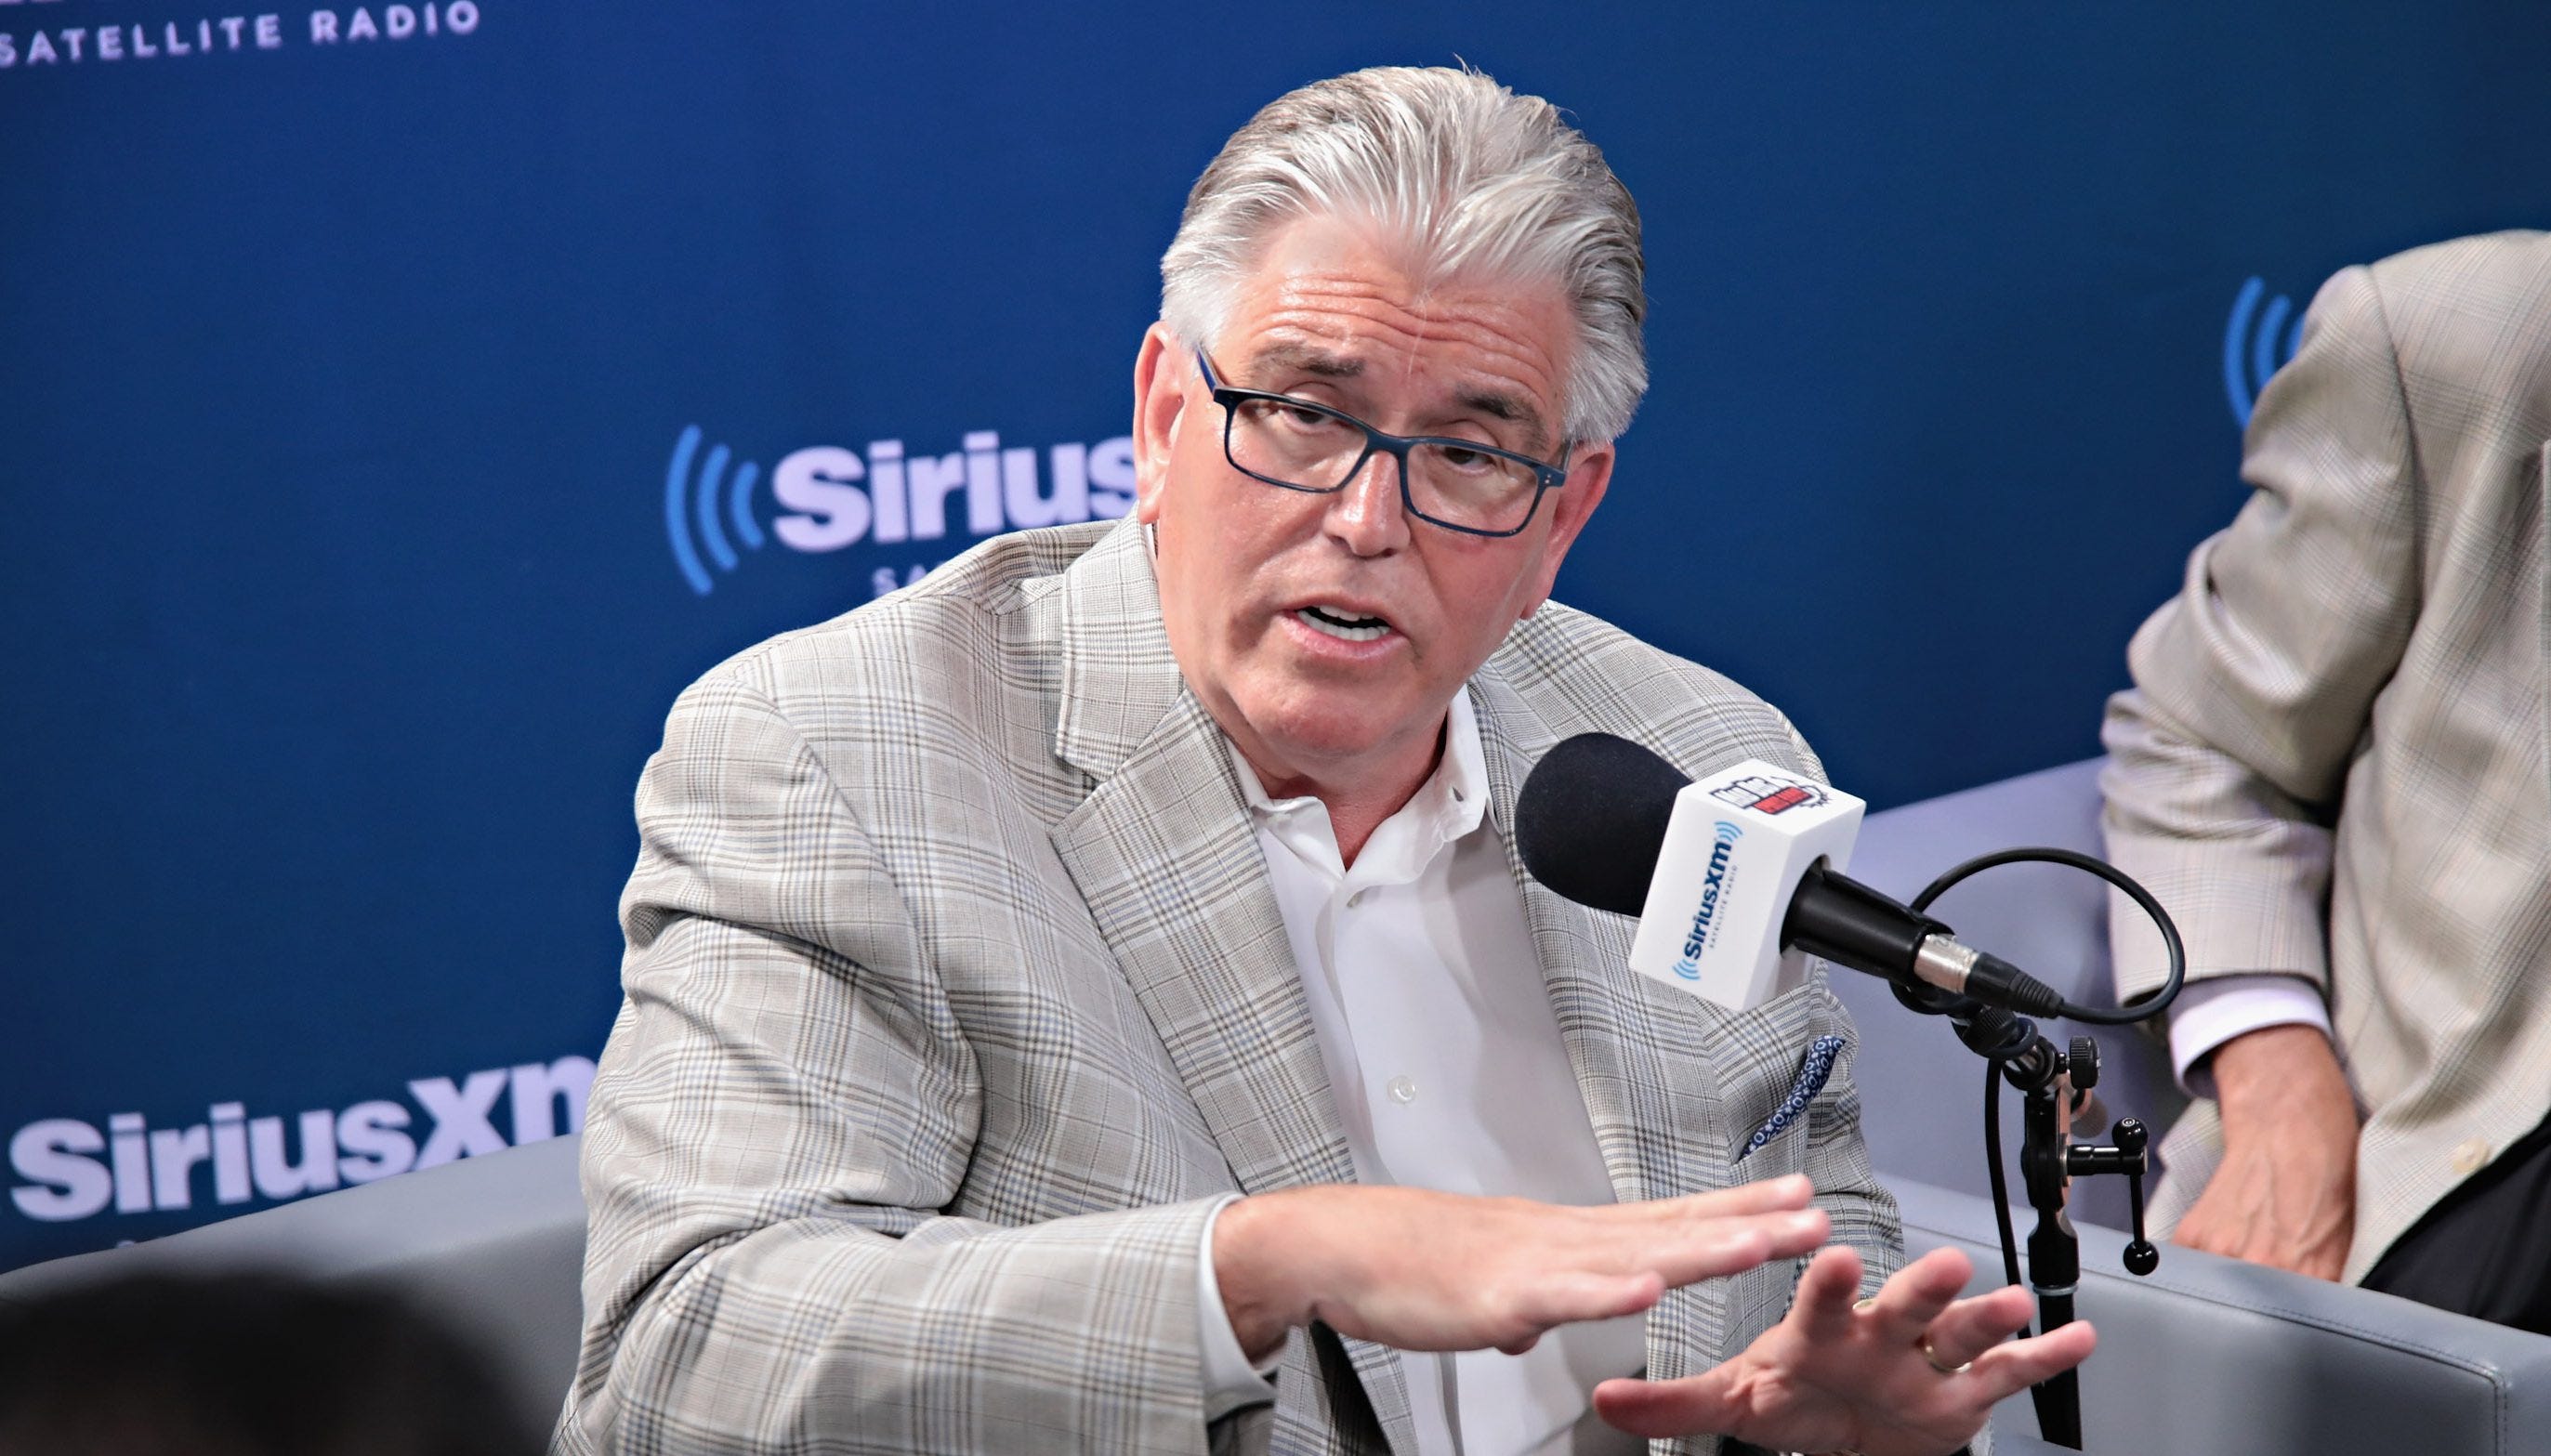 Mike Francesa argues against Aaron Rodgers with wrong stats